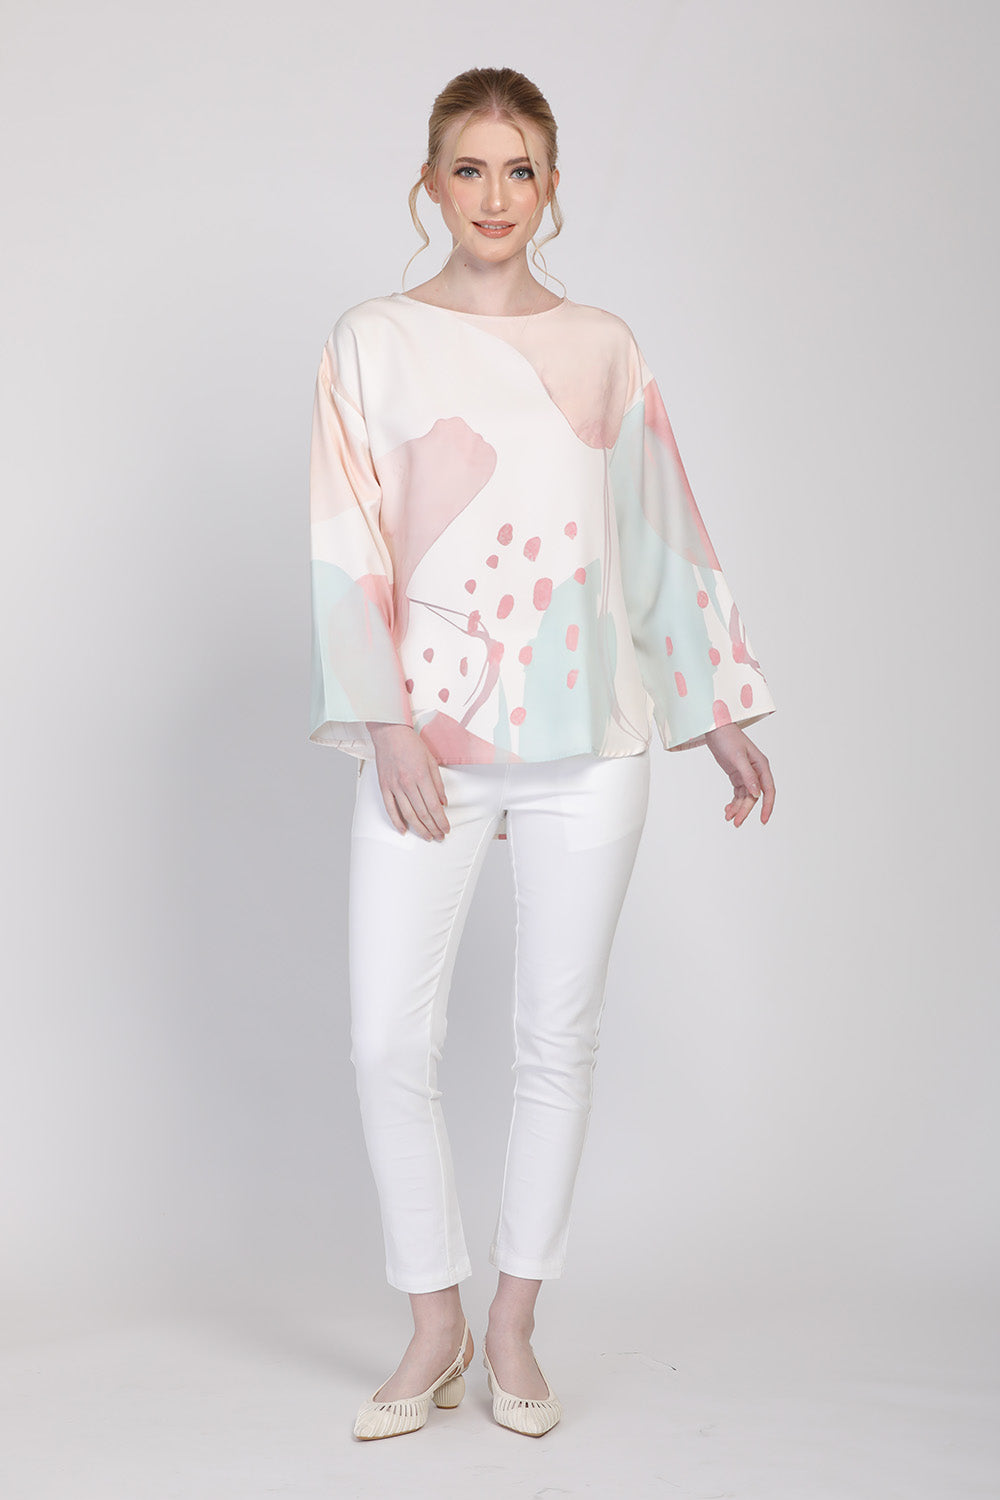 Ambellina Blouse in Abstract Prints